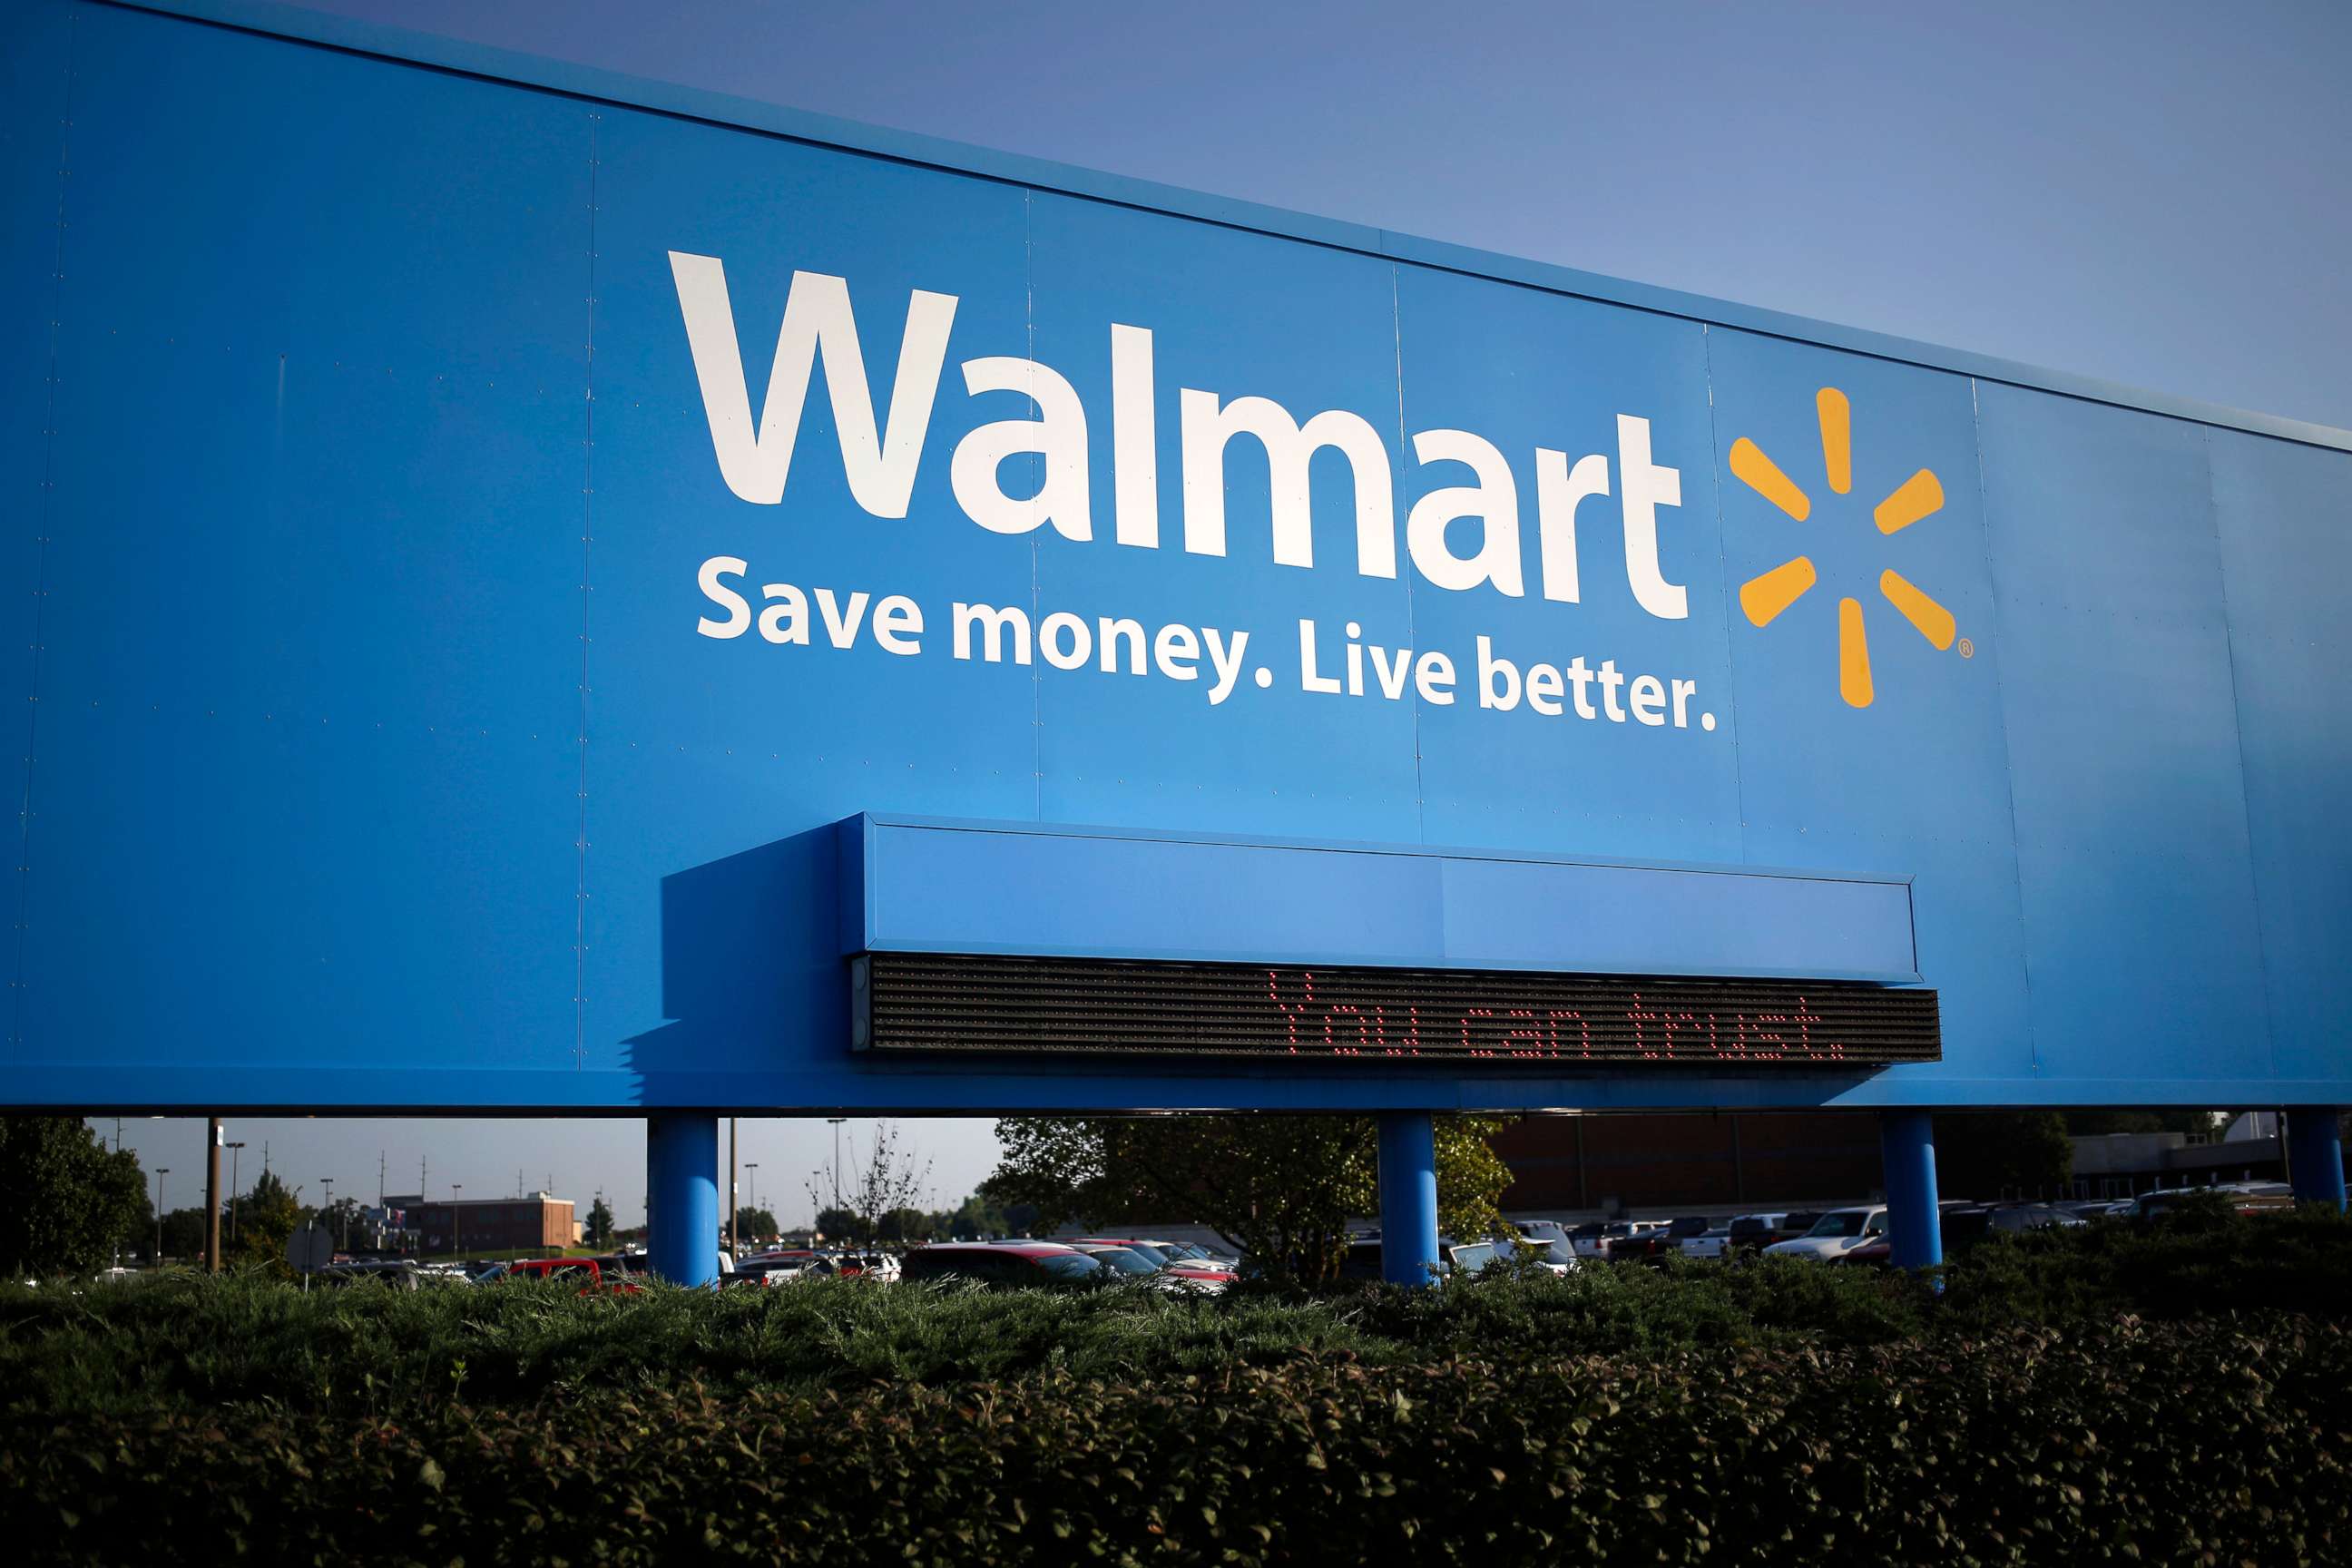 PHOTO: Signage is displayed outside of the Wal-Mart Stores Inc. headquarters building in Bentonville, Arkansas, July 29, 2015.